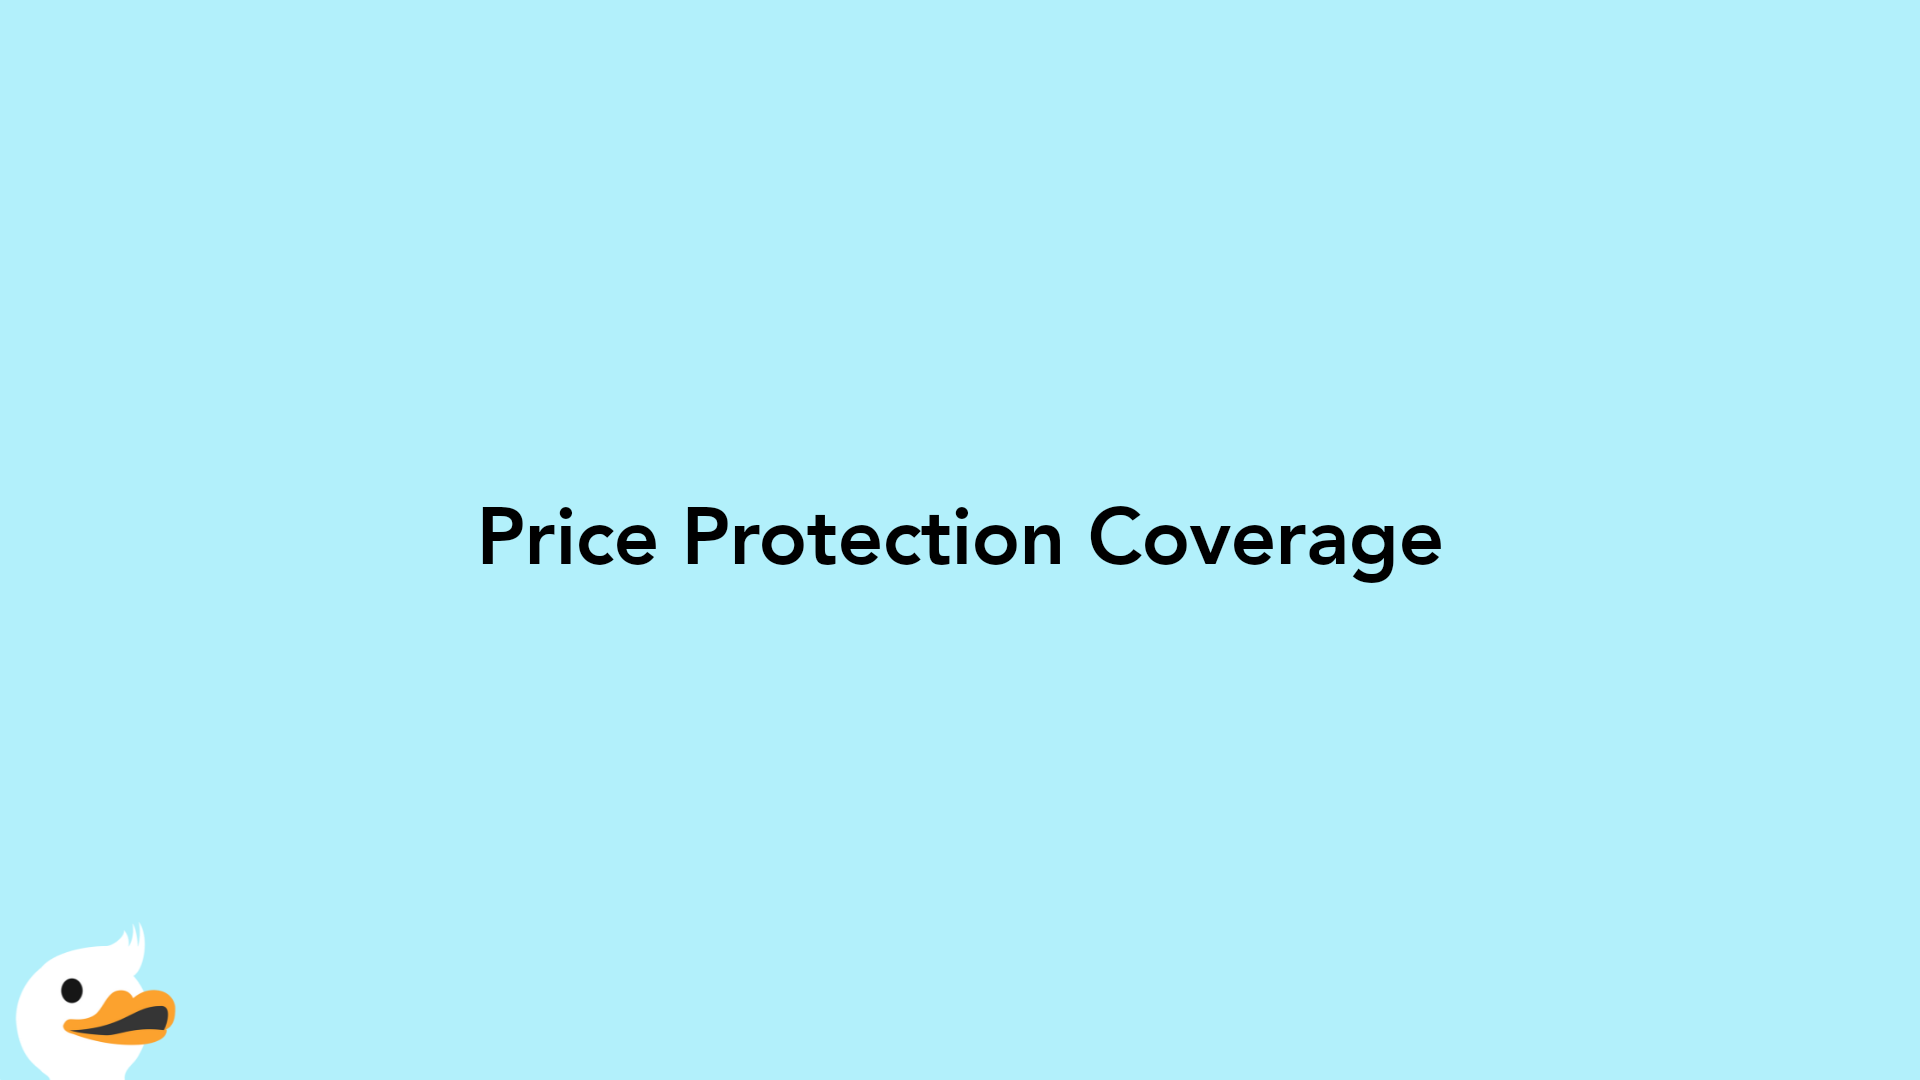 Price Protection Coverage